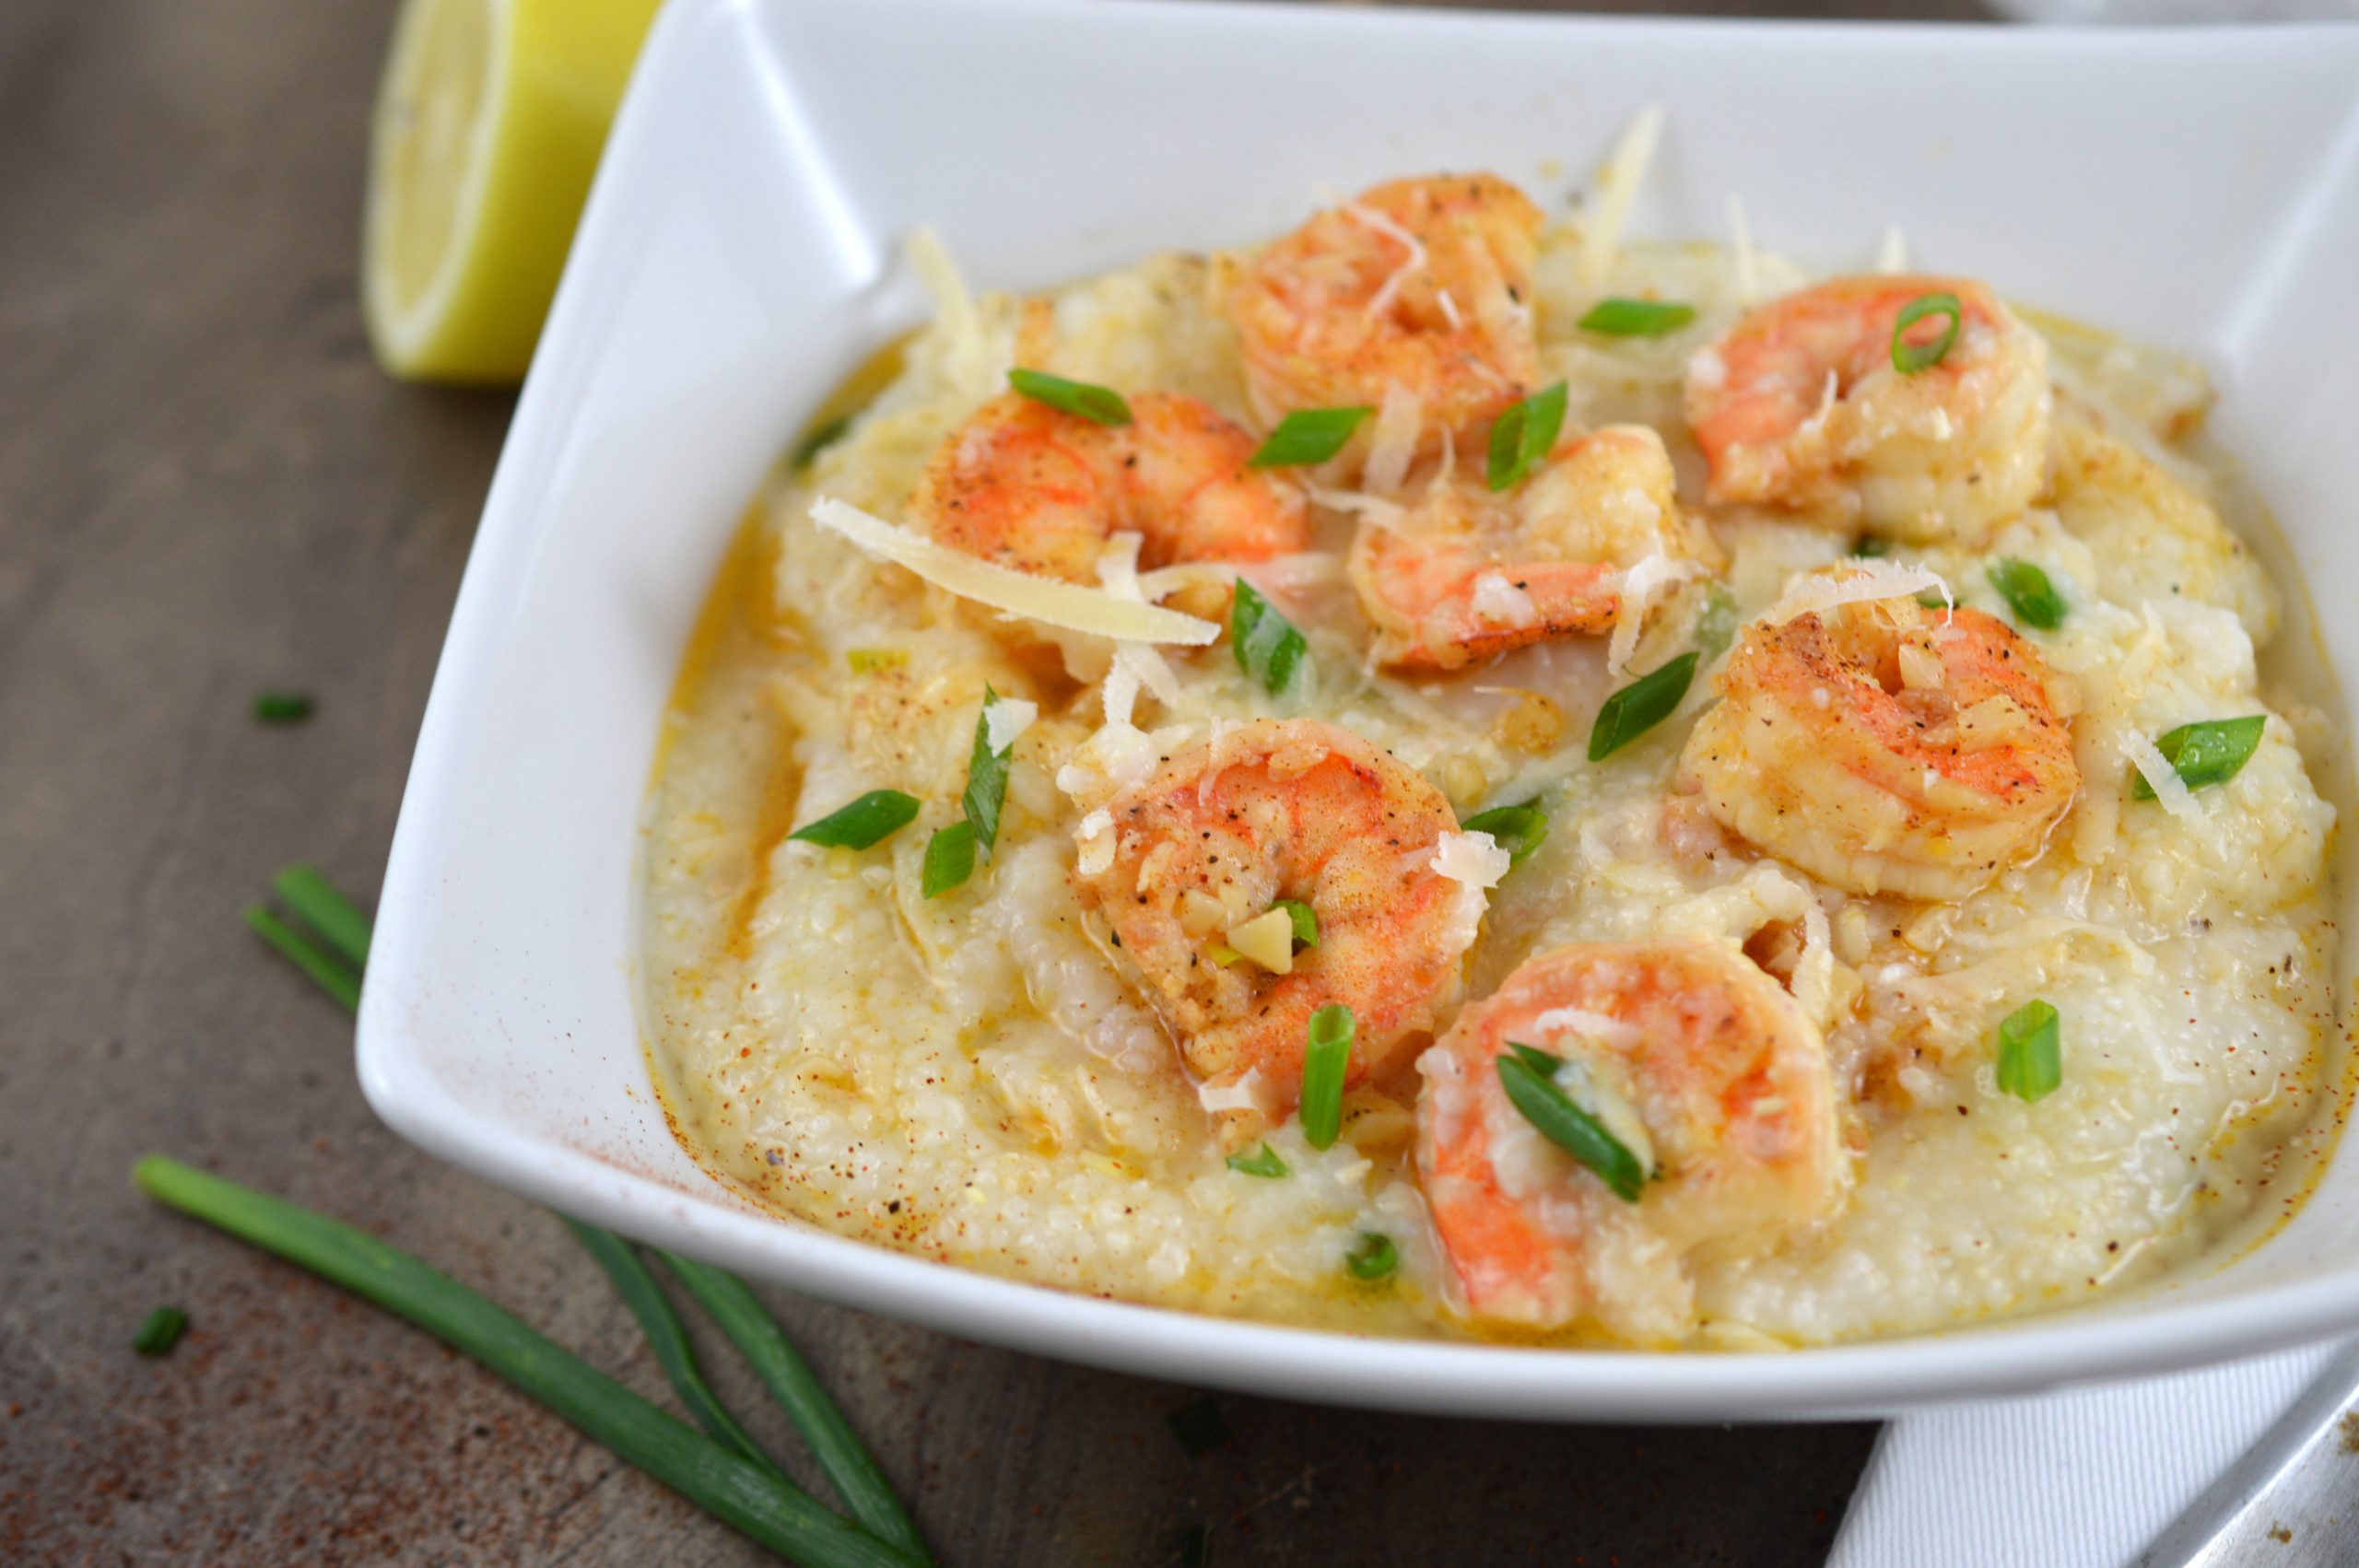 Tasty Tuesday’s Recipe for the Week- The BEST Shrimp and Grits